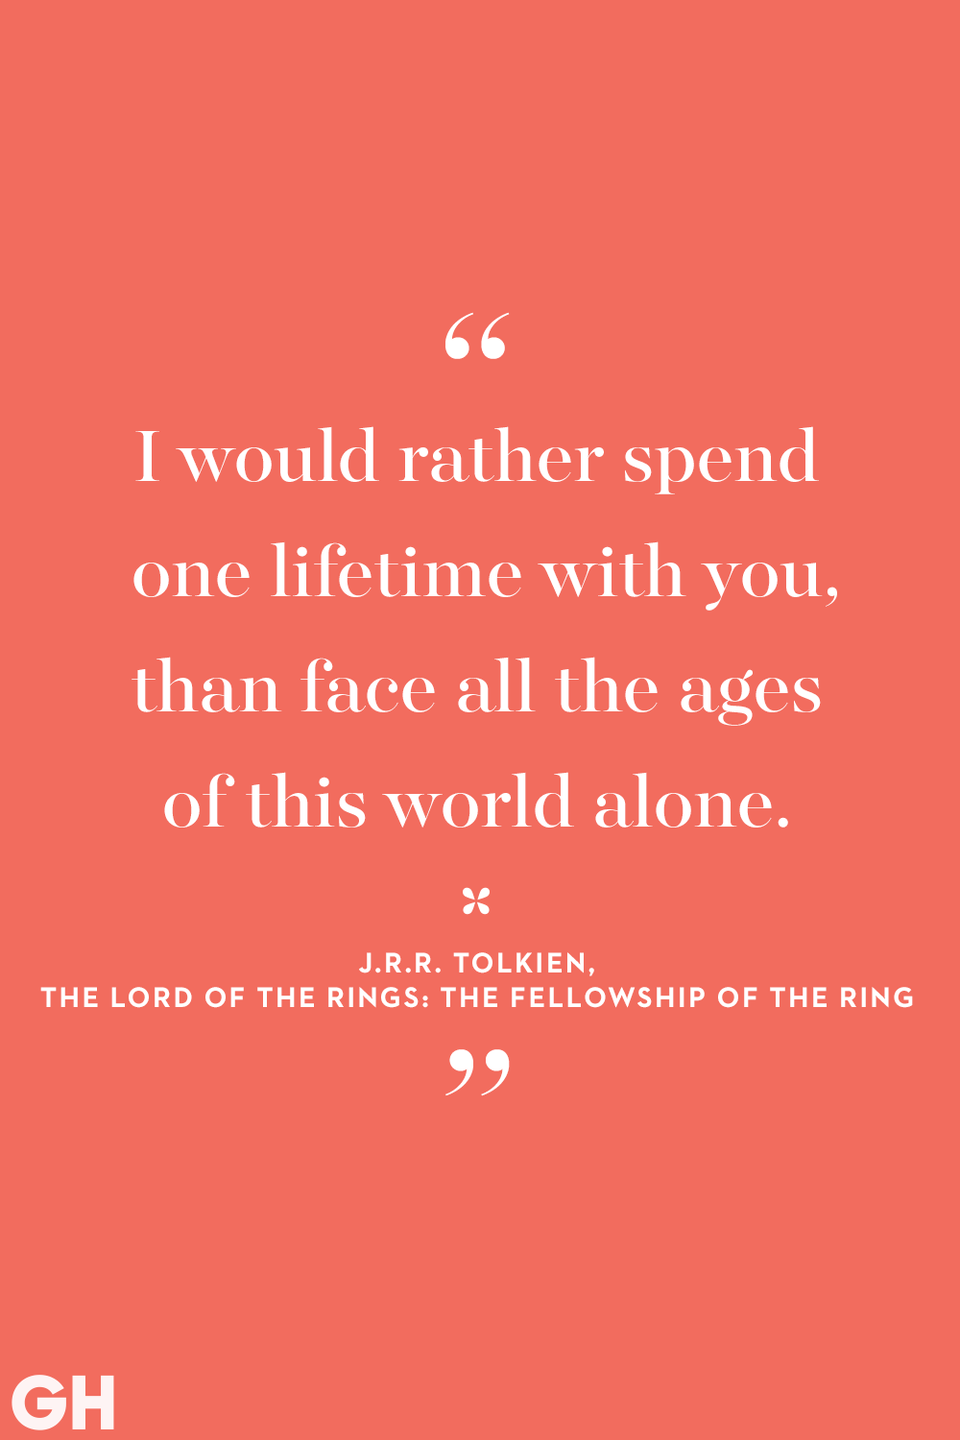 47) J.R.R. Tolkien, The Lord of the Rings: The Fellowship of the Ring